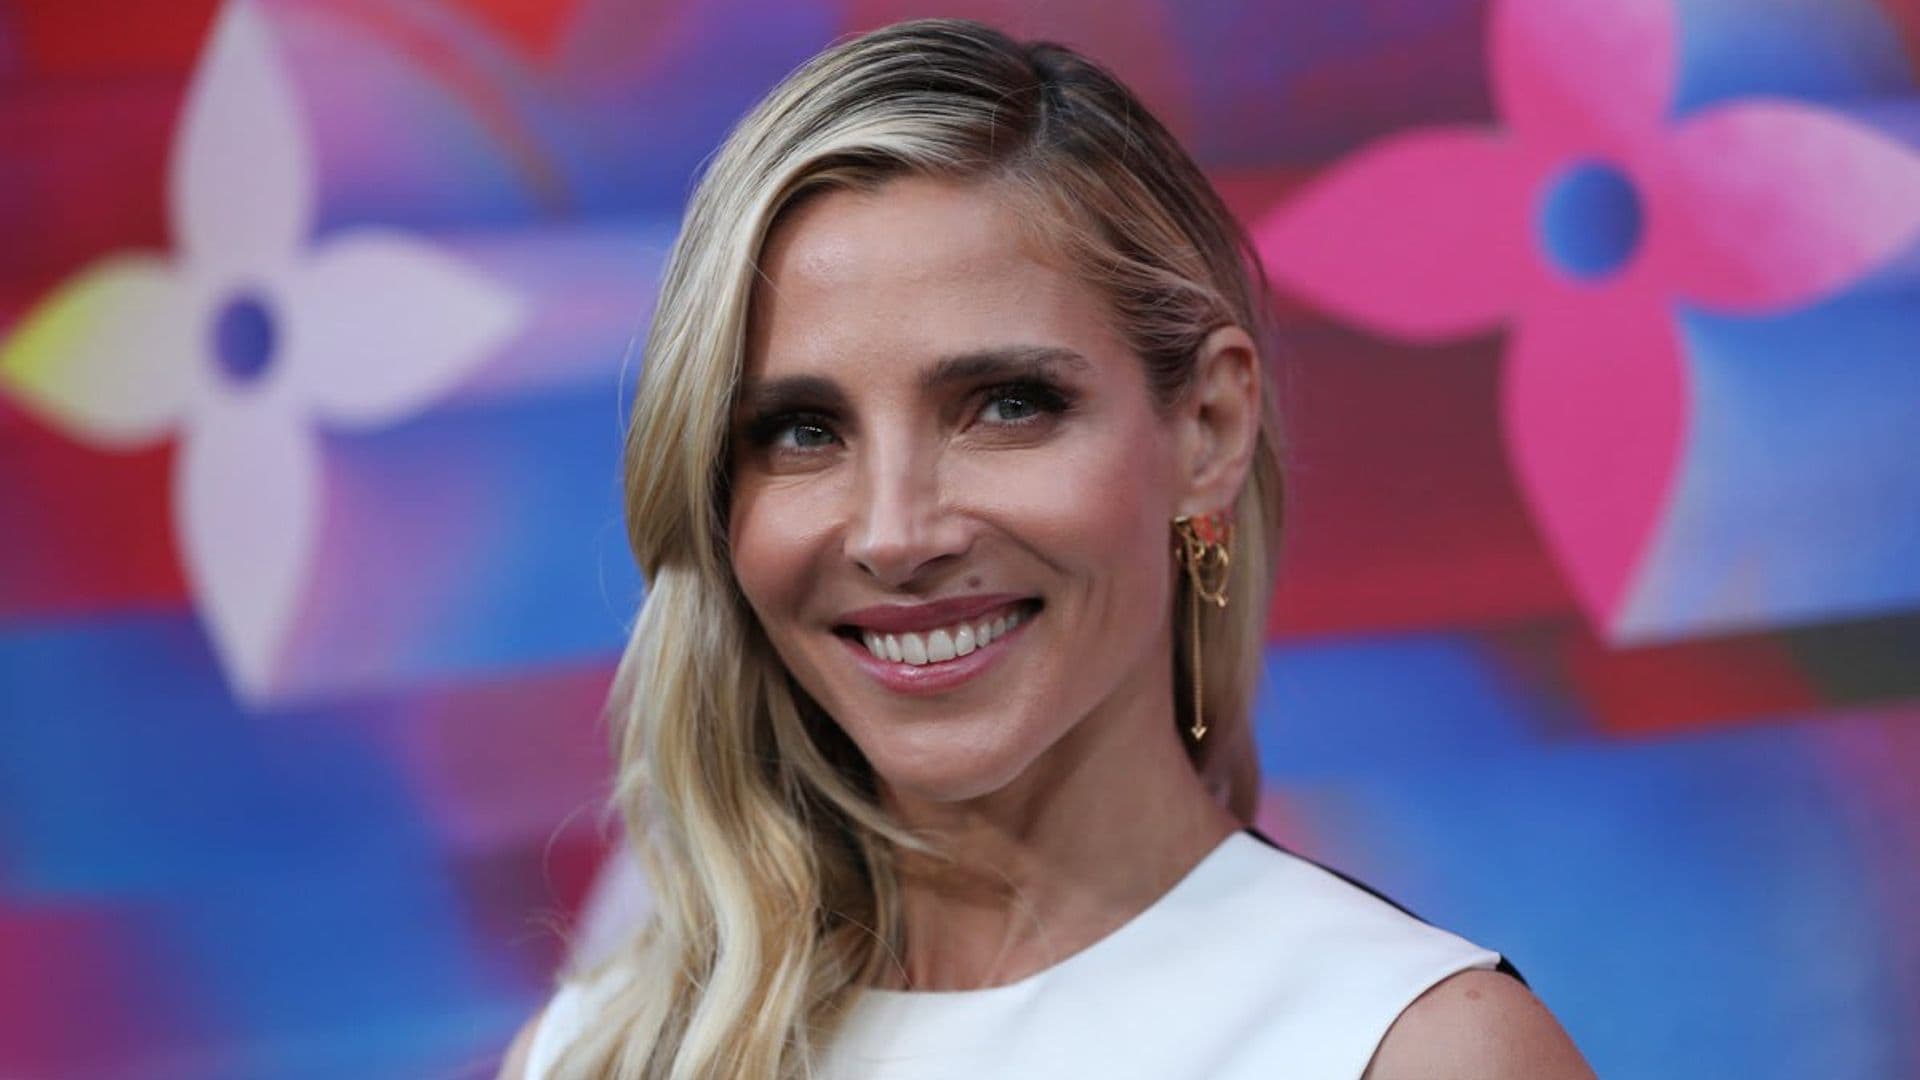 Elsa Pataky shares first look of her upcoming Netflix film